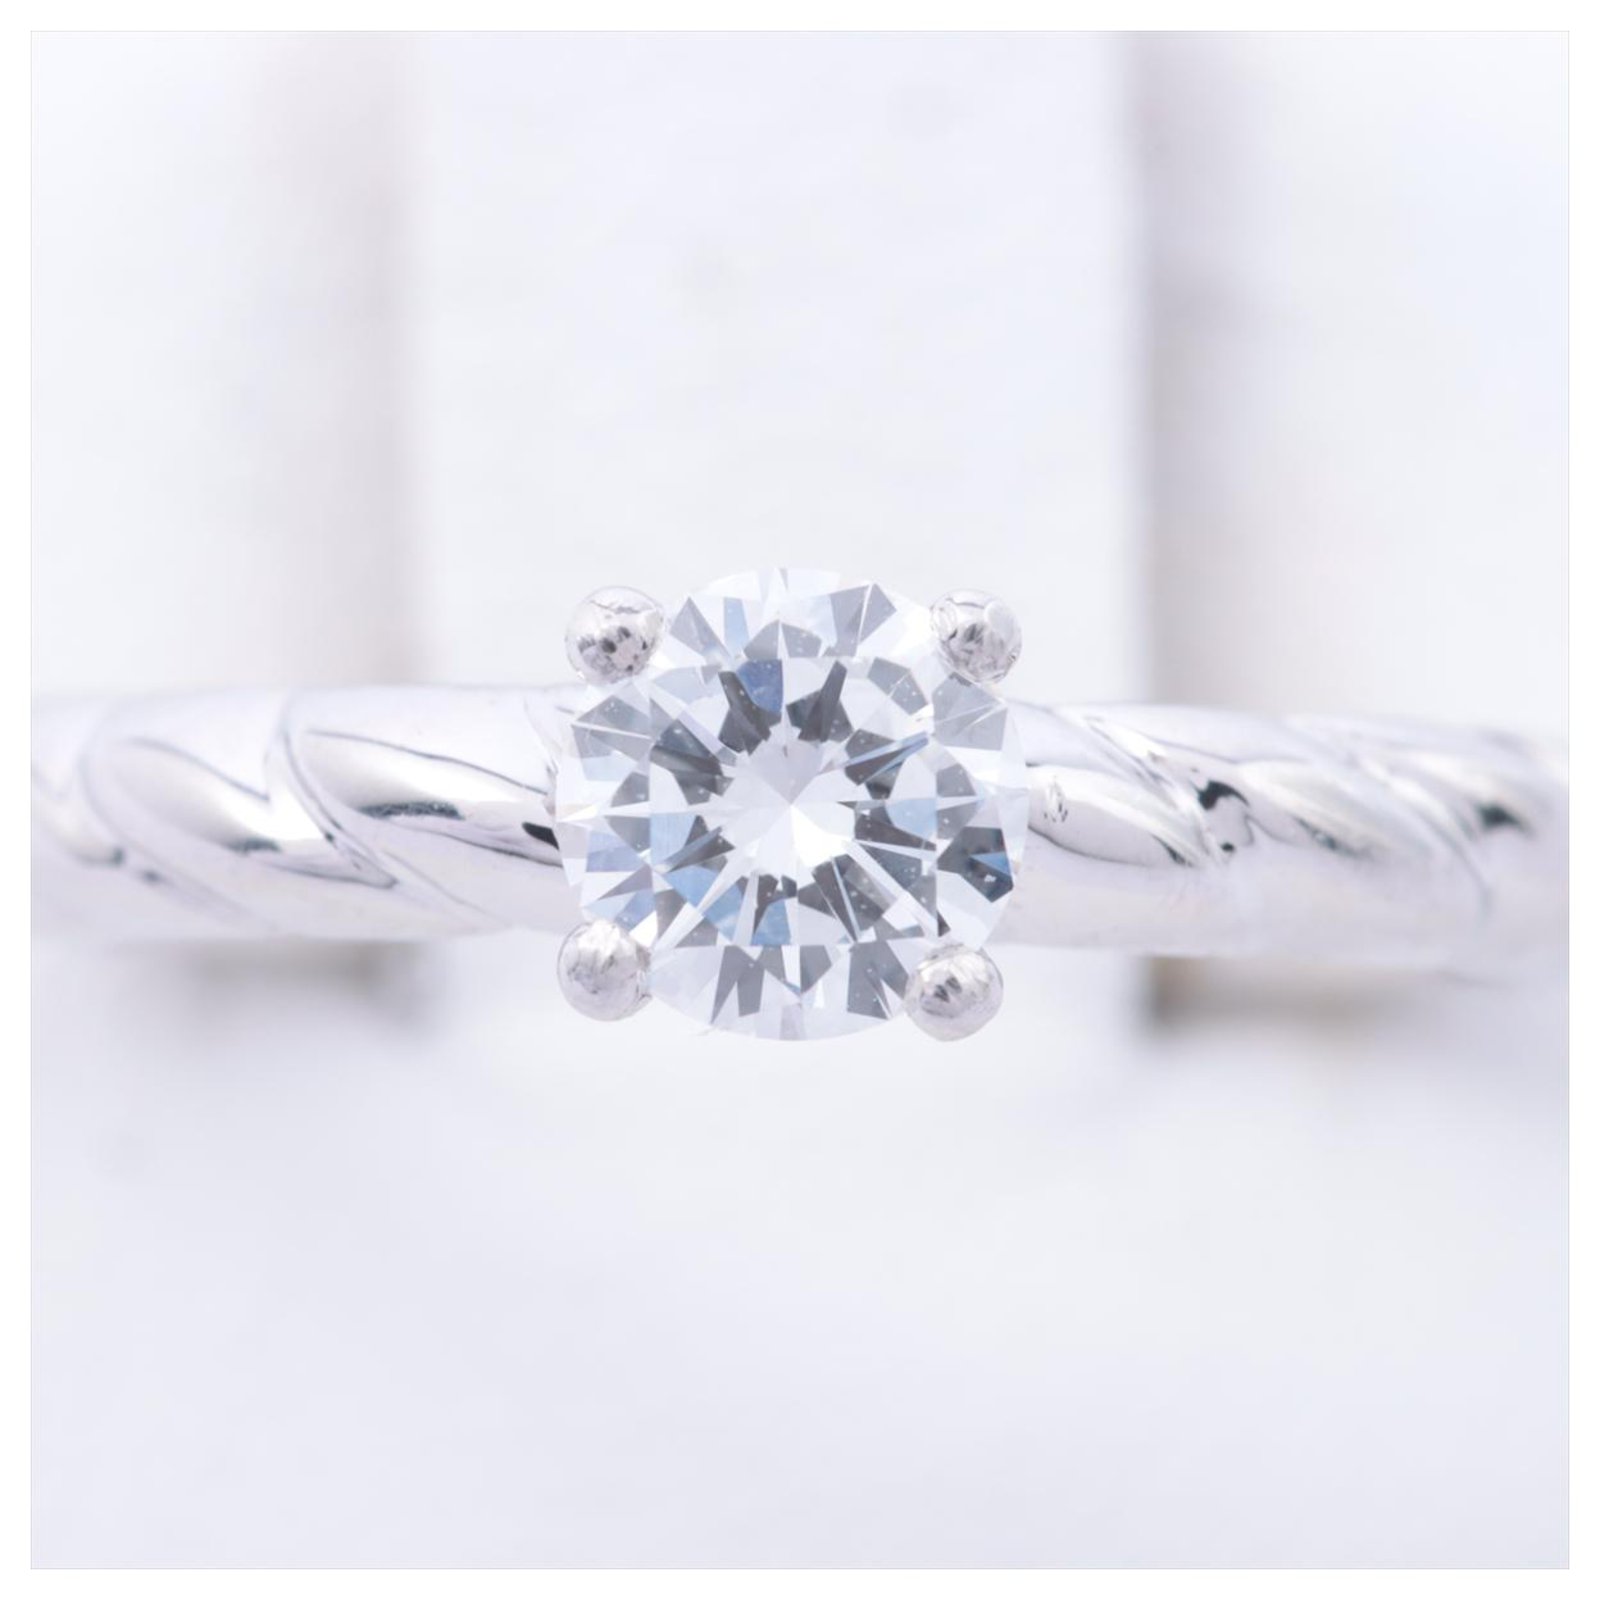 Engagement rings by Chaumet - Rings in gold, platinum or diamonds